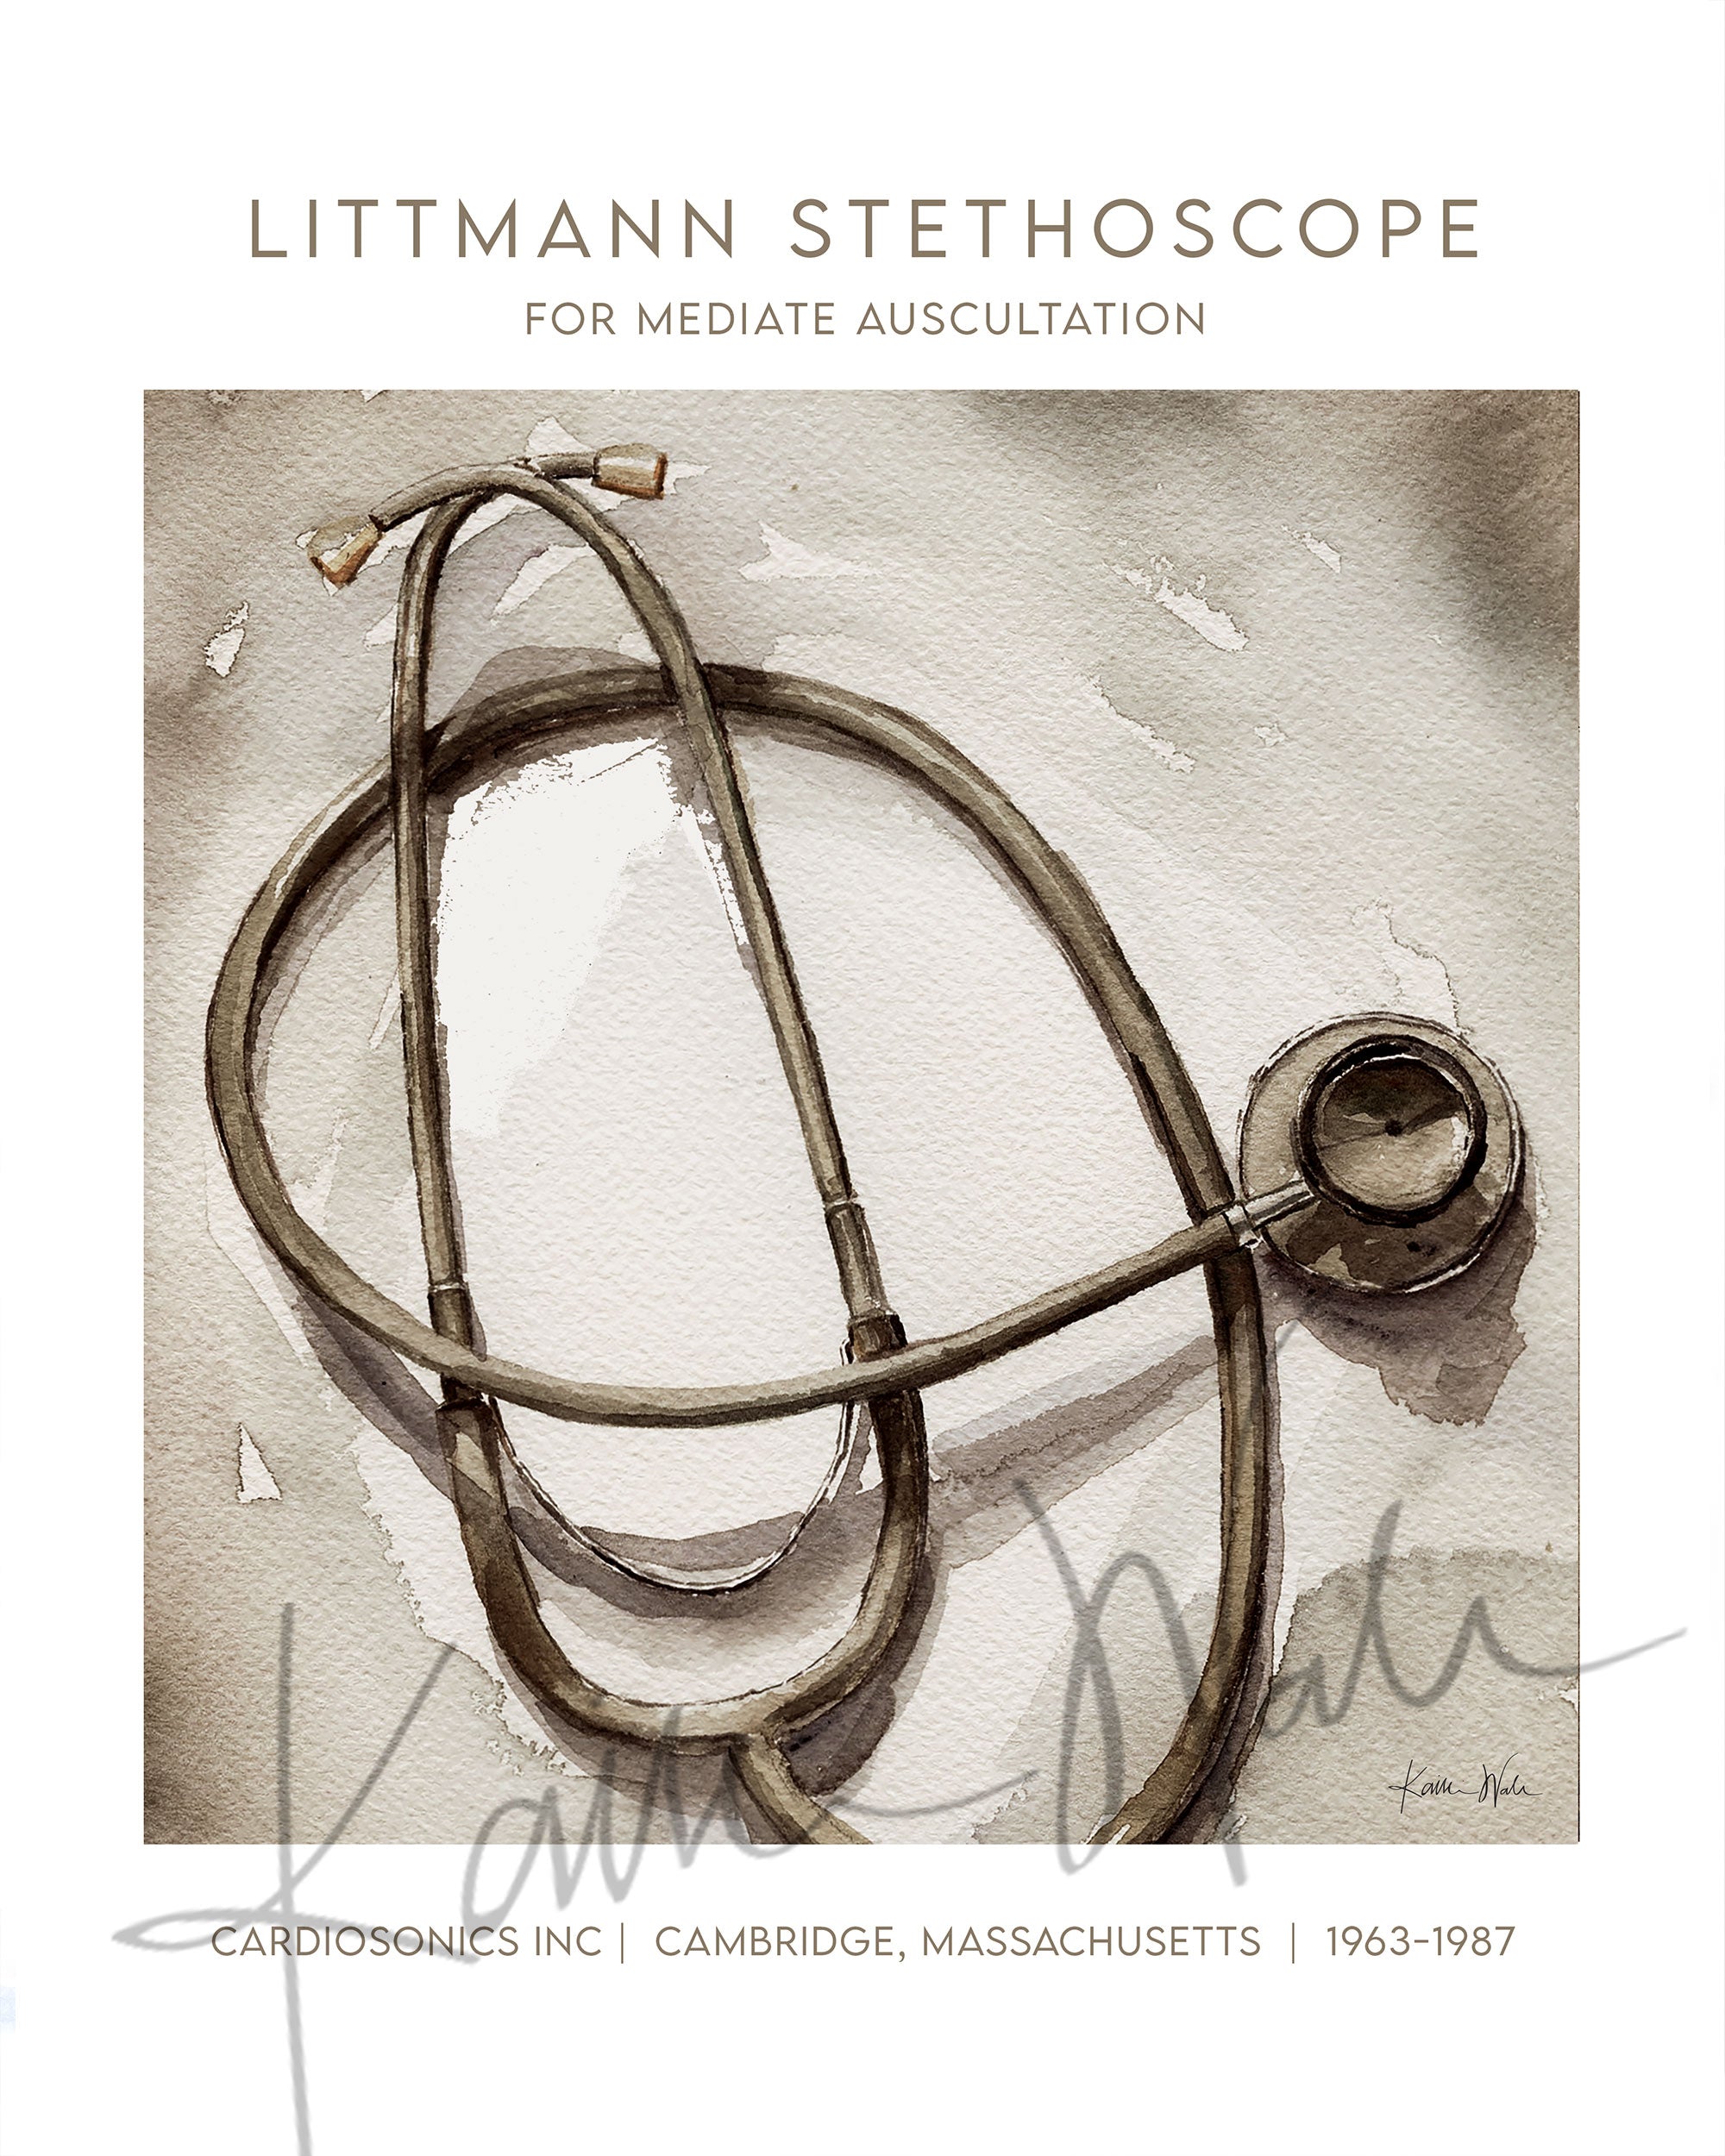 Unframed watercolor painting of a Littmann stethoscope in an antique style.